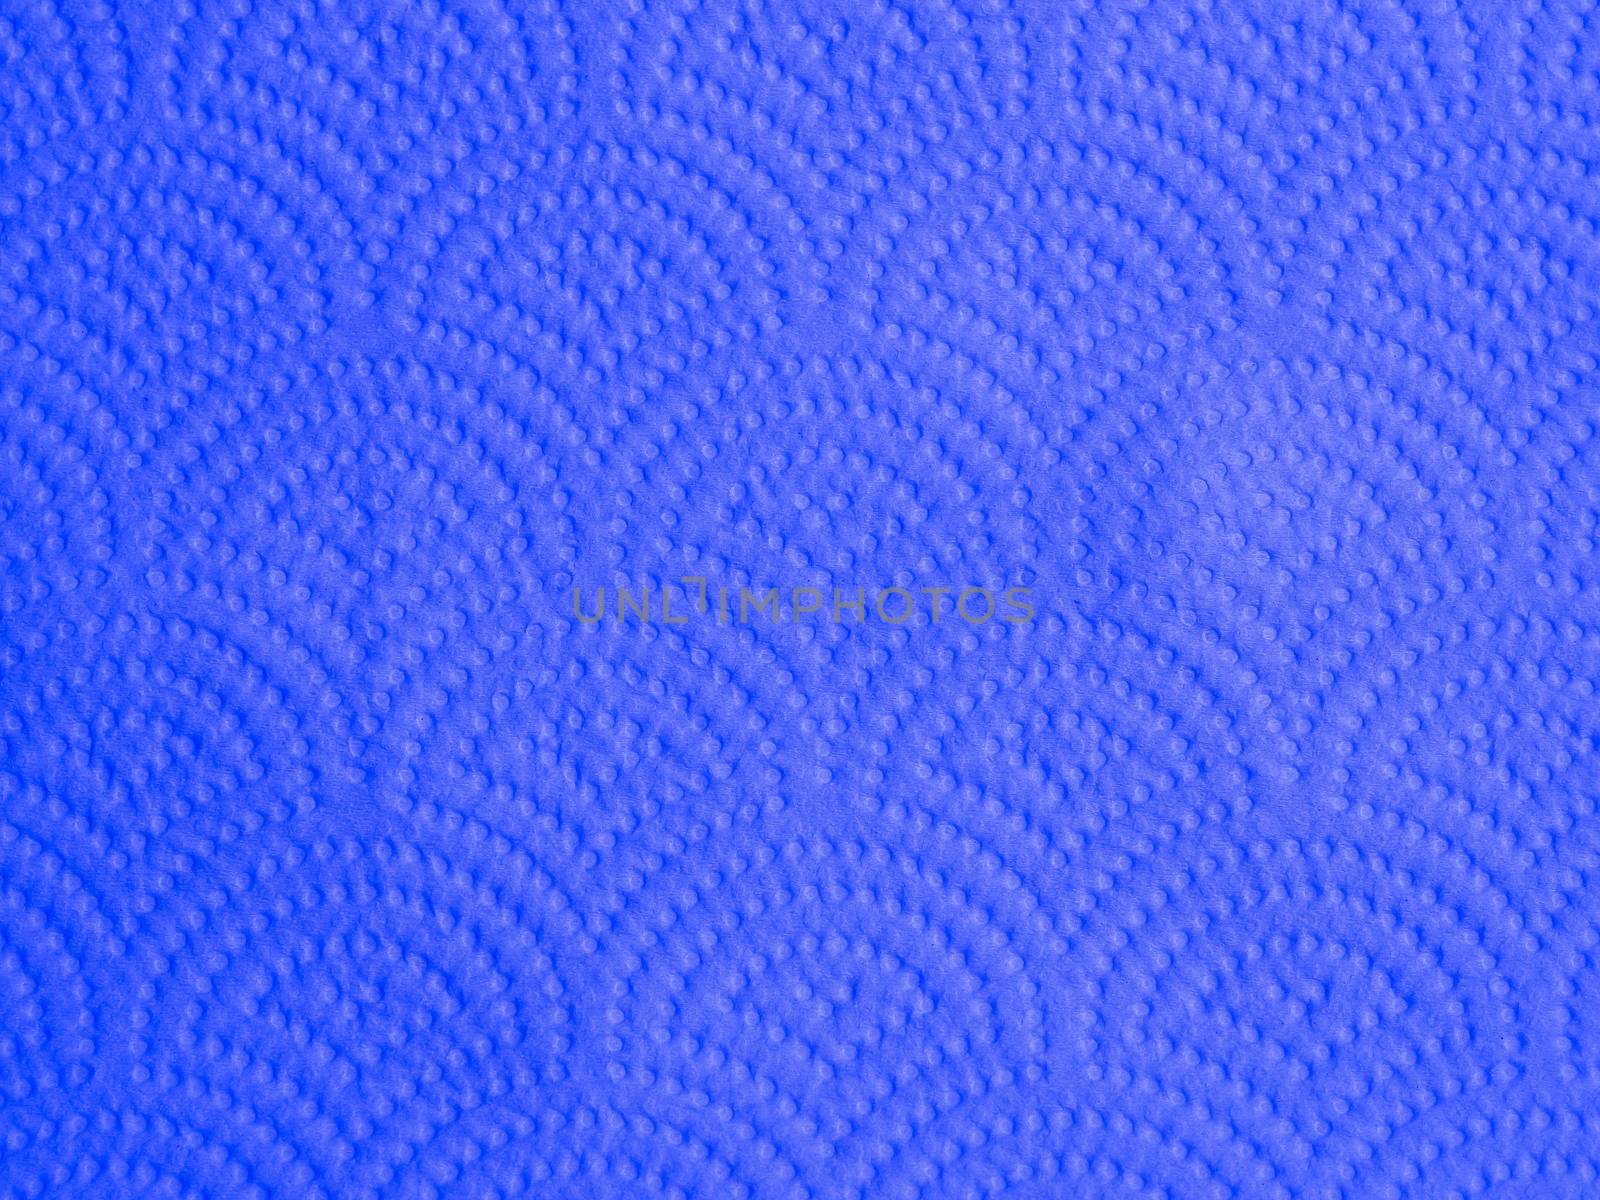 texture of deep blue kitchen paper towel . Use for background